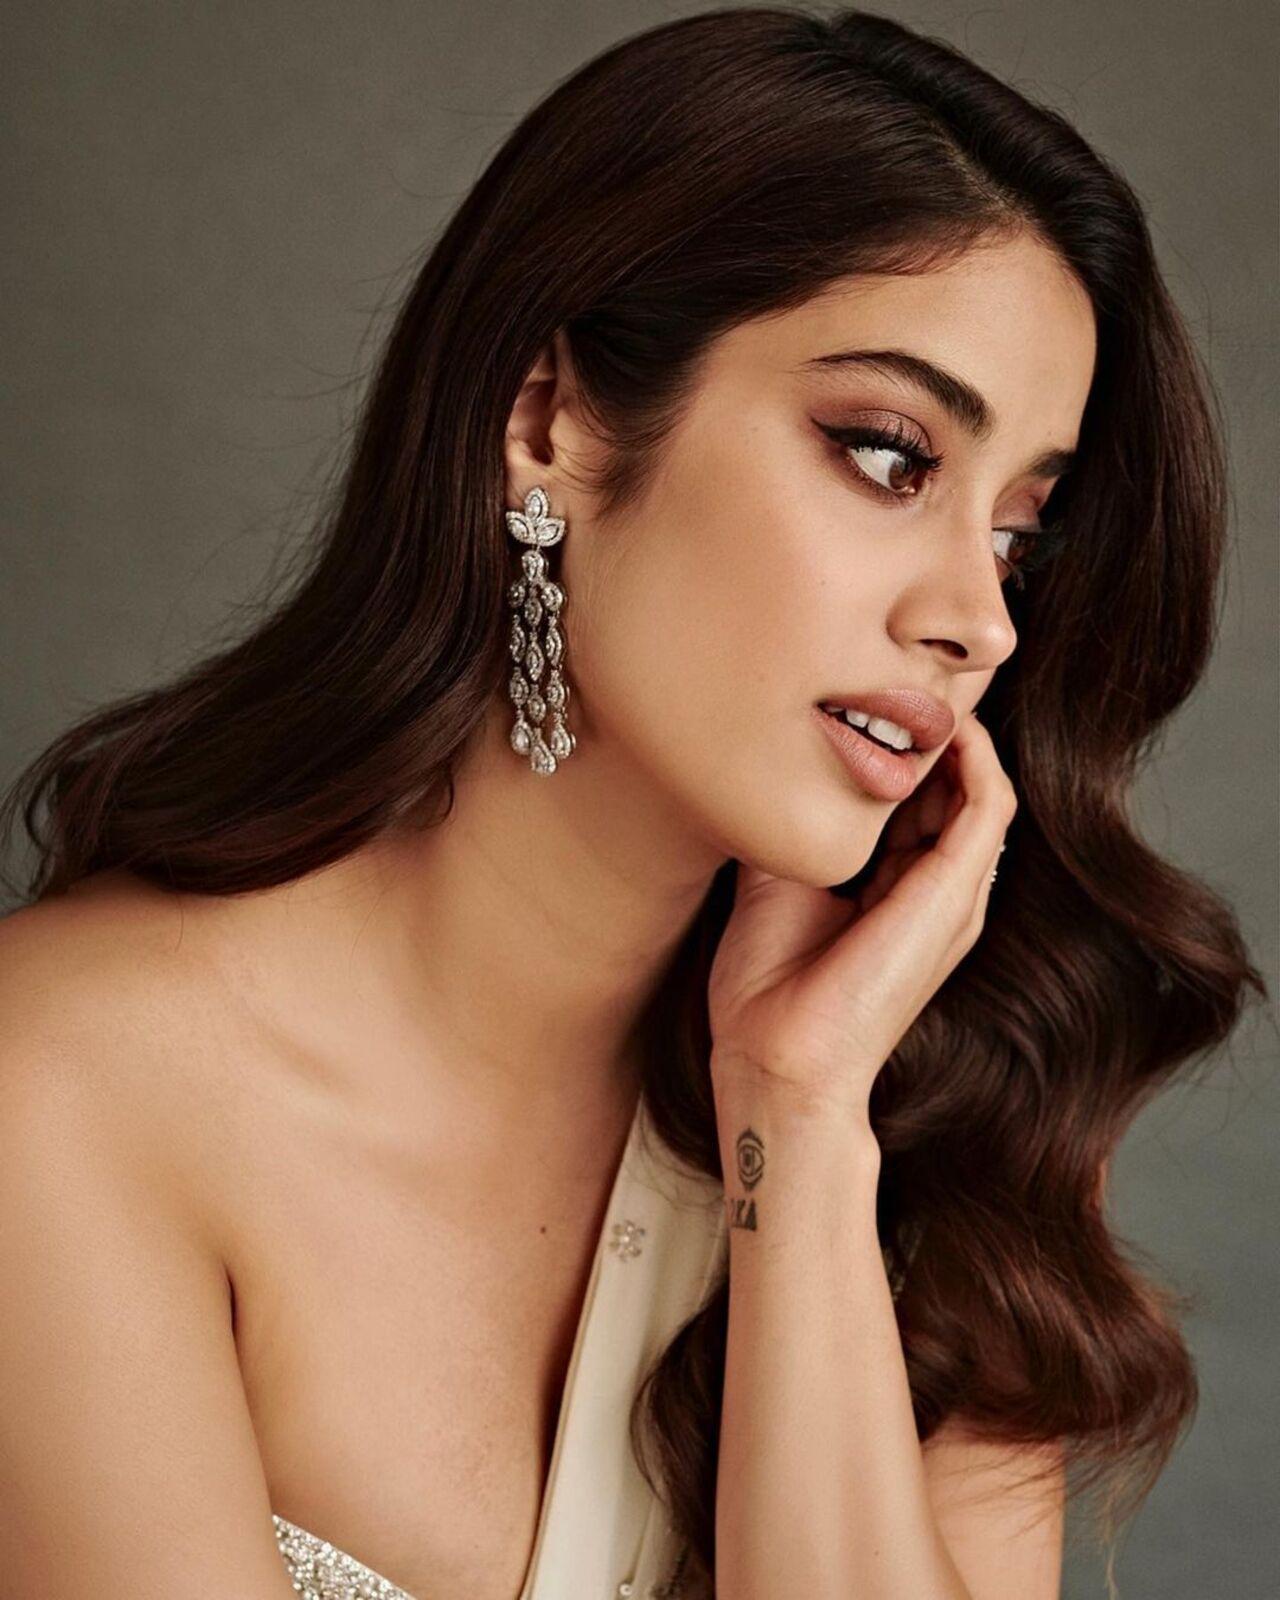 What's noteworthy is that she decided to ditch heavy jewelry and instead wore a beautiful and intricate earring, allowing her natural beauty and the saree's elegance to shine through